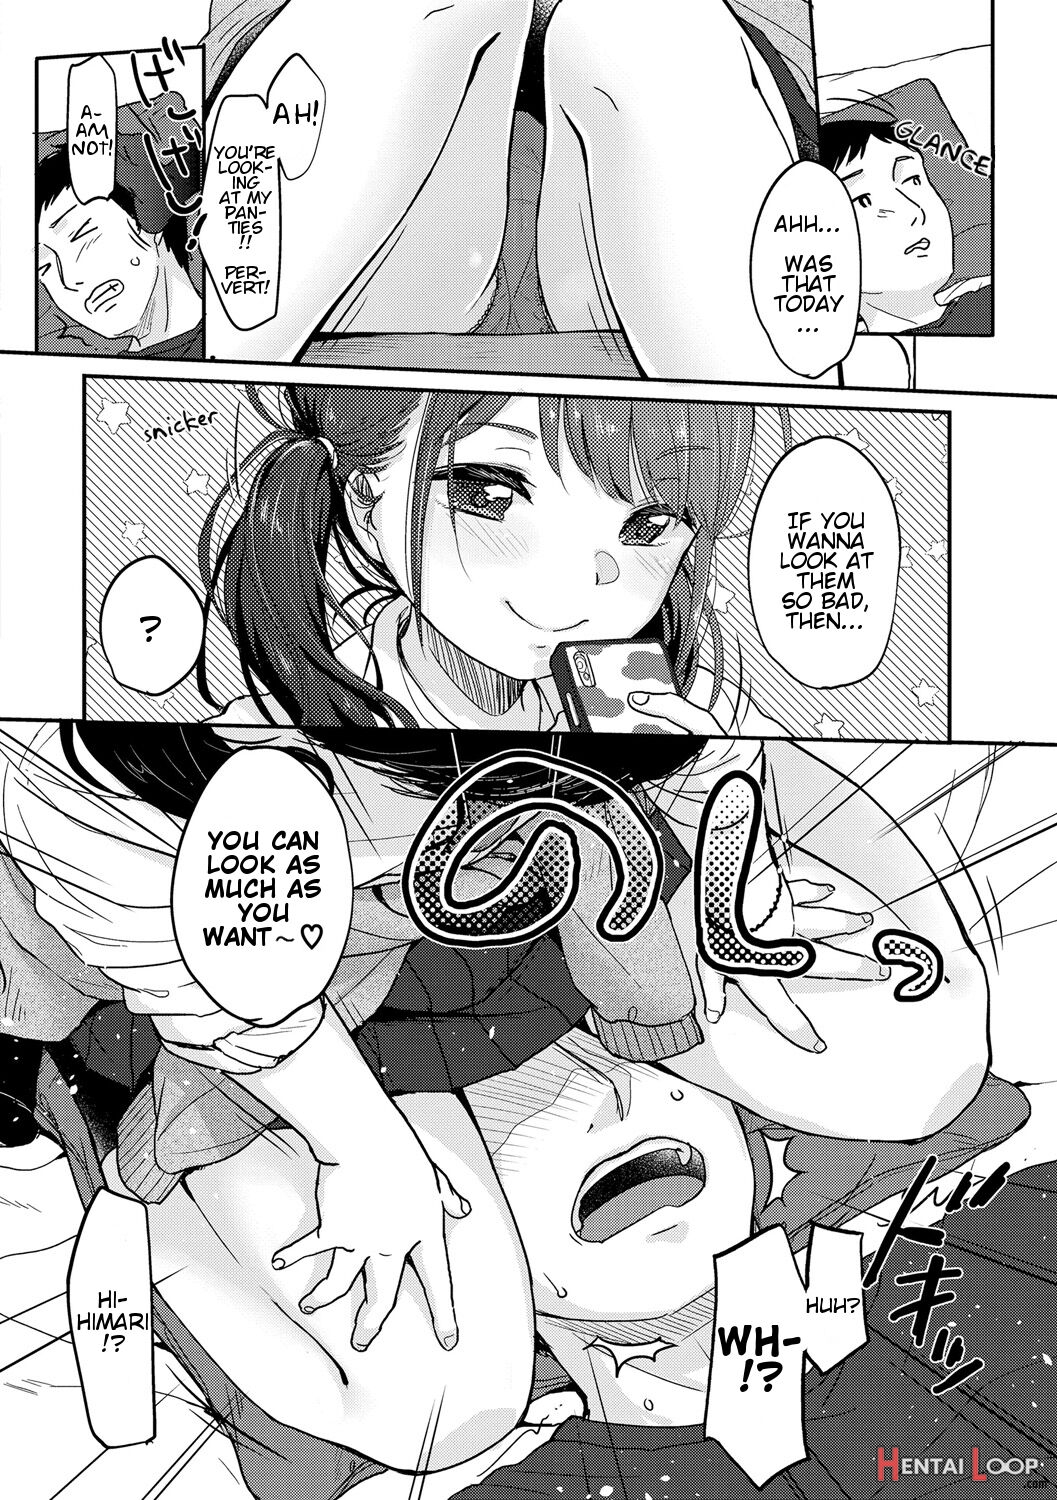 Thighs Are But A Dream + Omake page 2